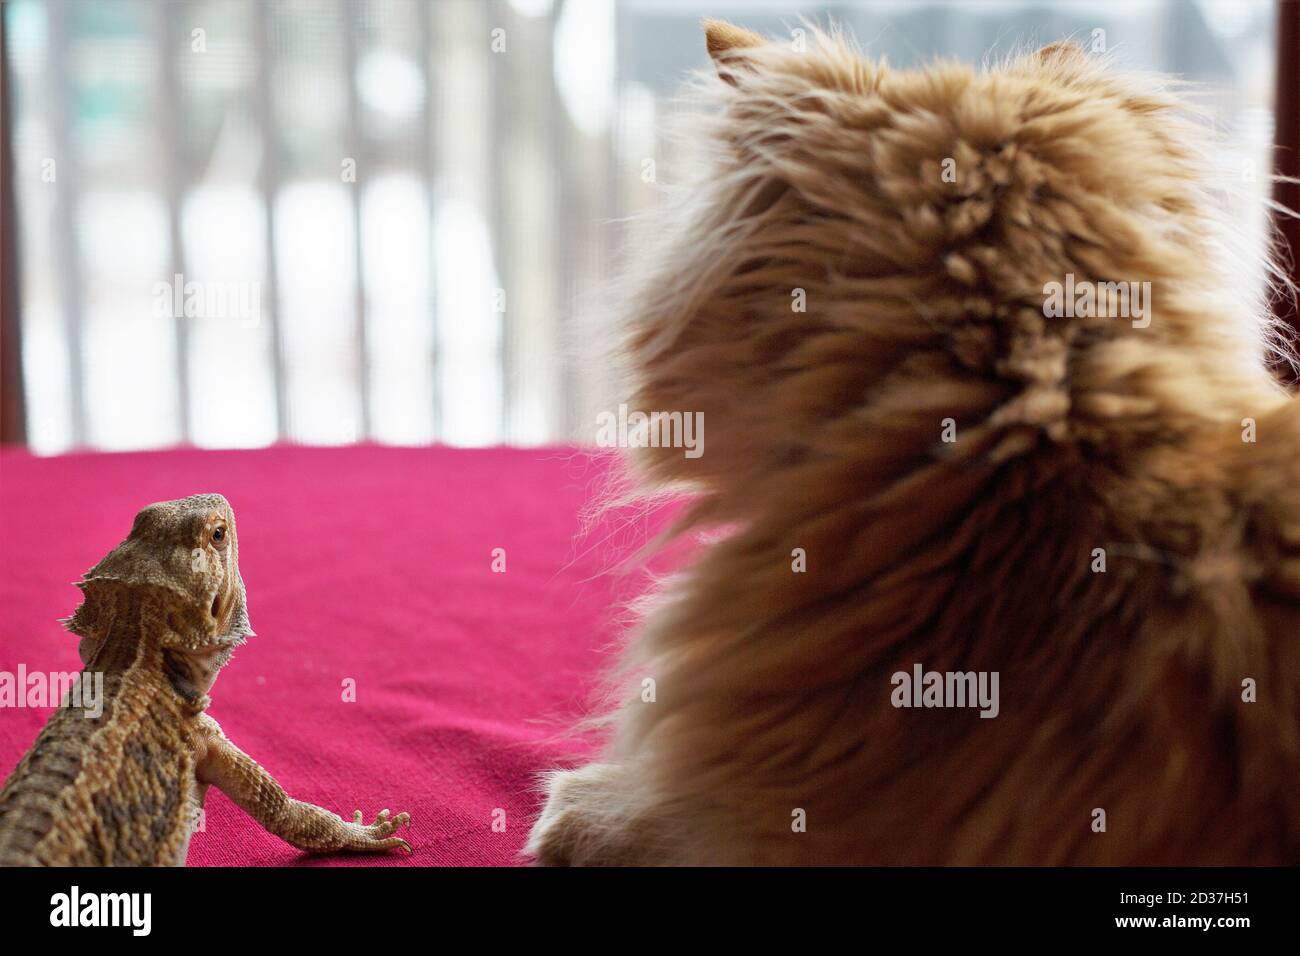 A cat and a bearded dragon sitting side by side and looking out a window. Stock Photo